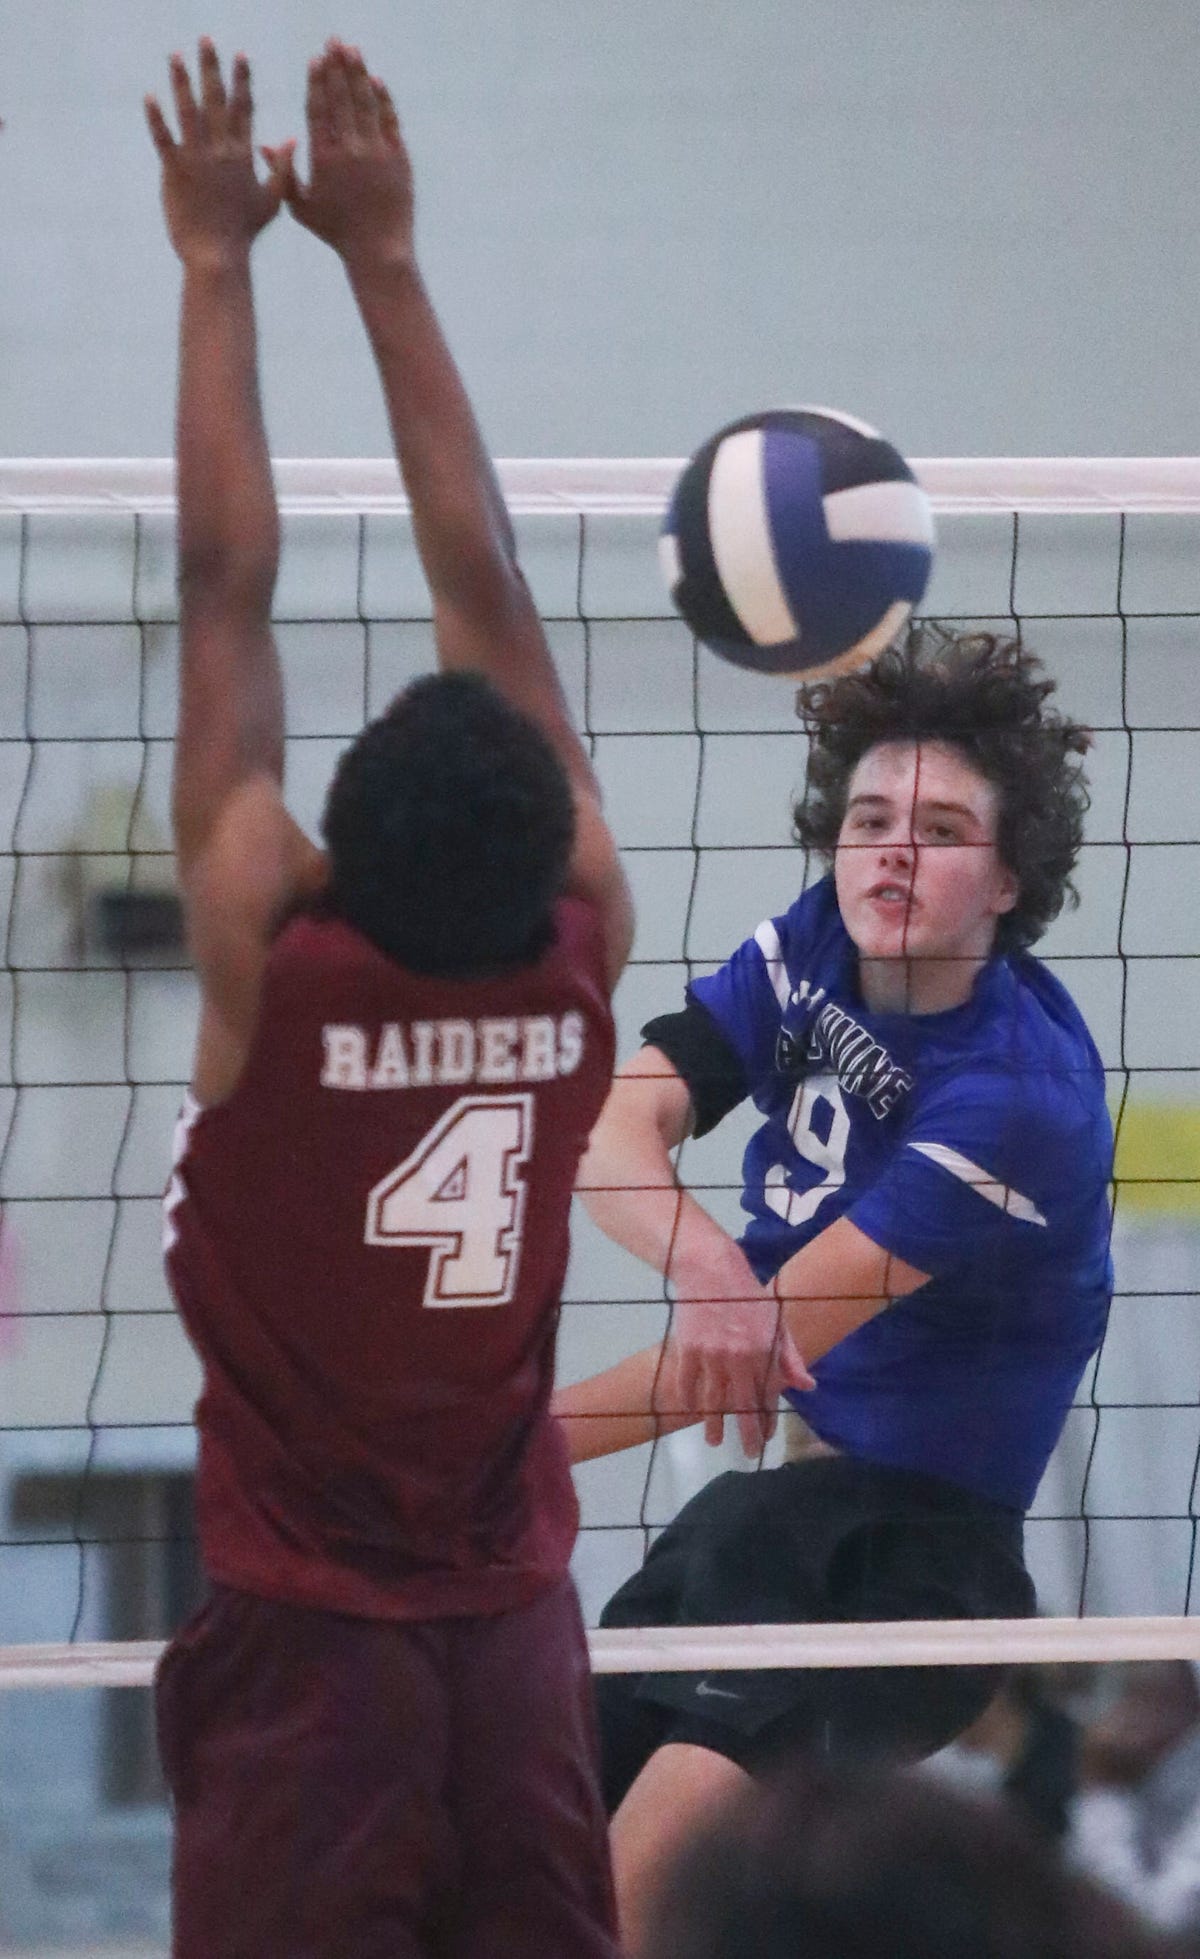 Brandywine boys volleyball standout wins latest Delaware Online Athlete of the Week vote